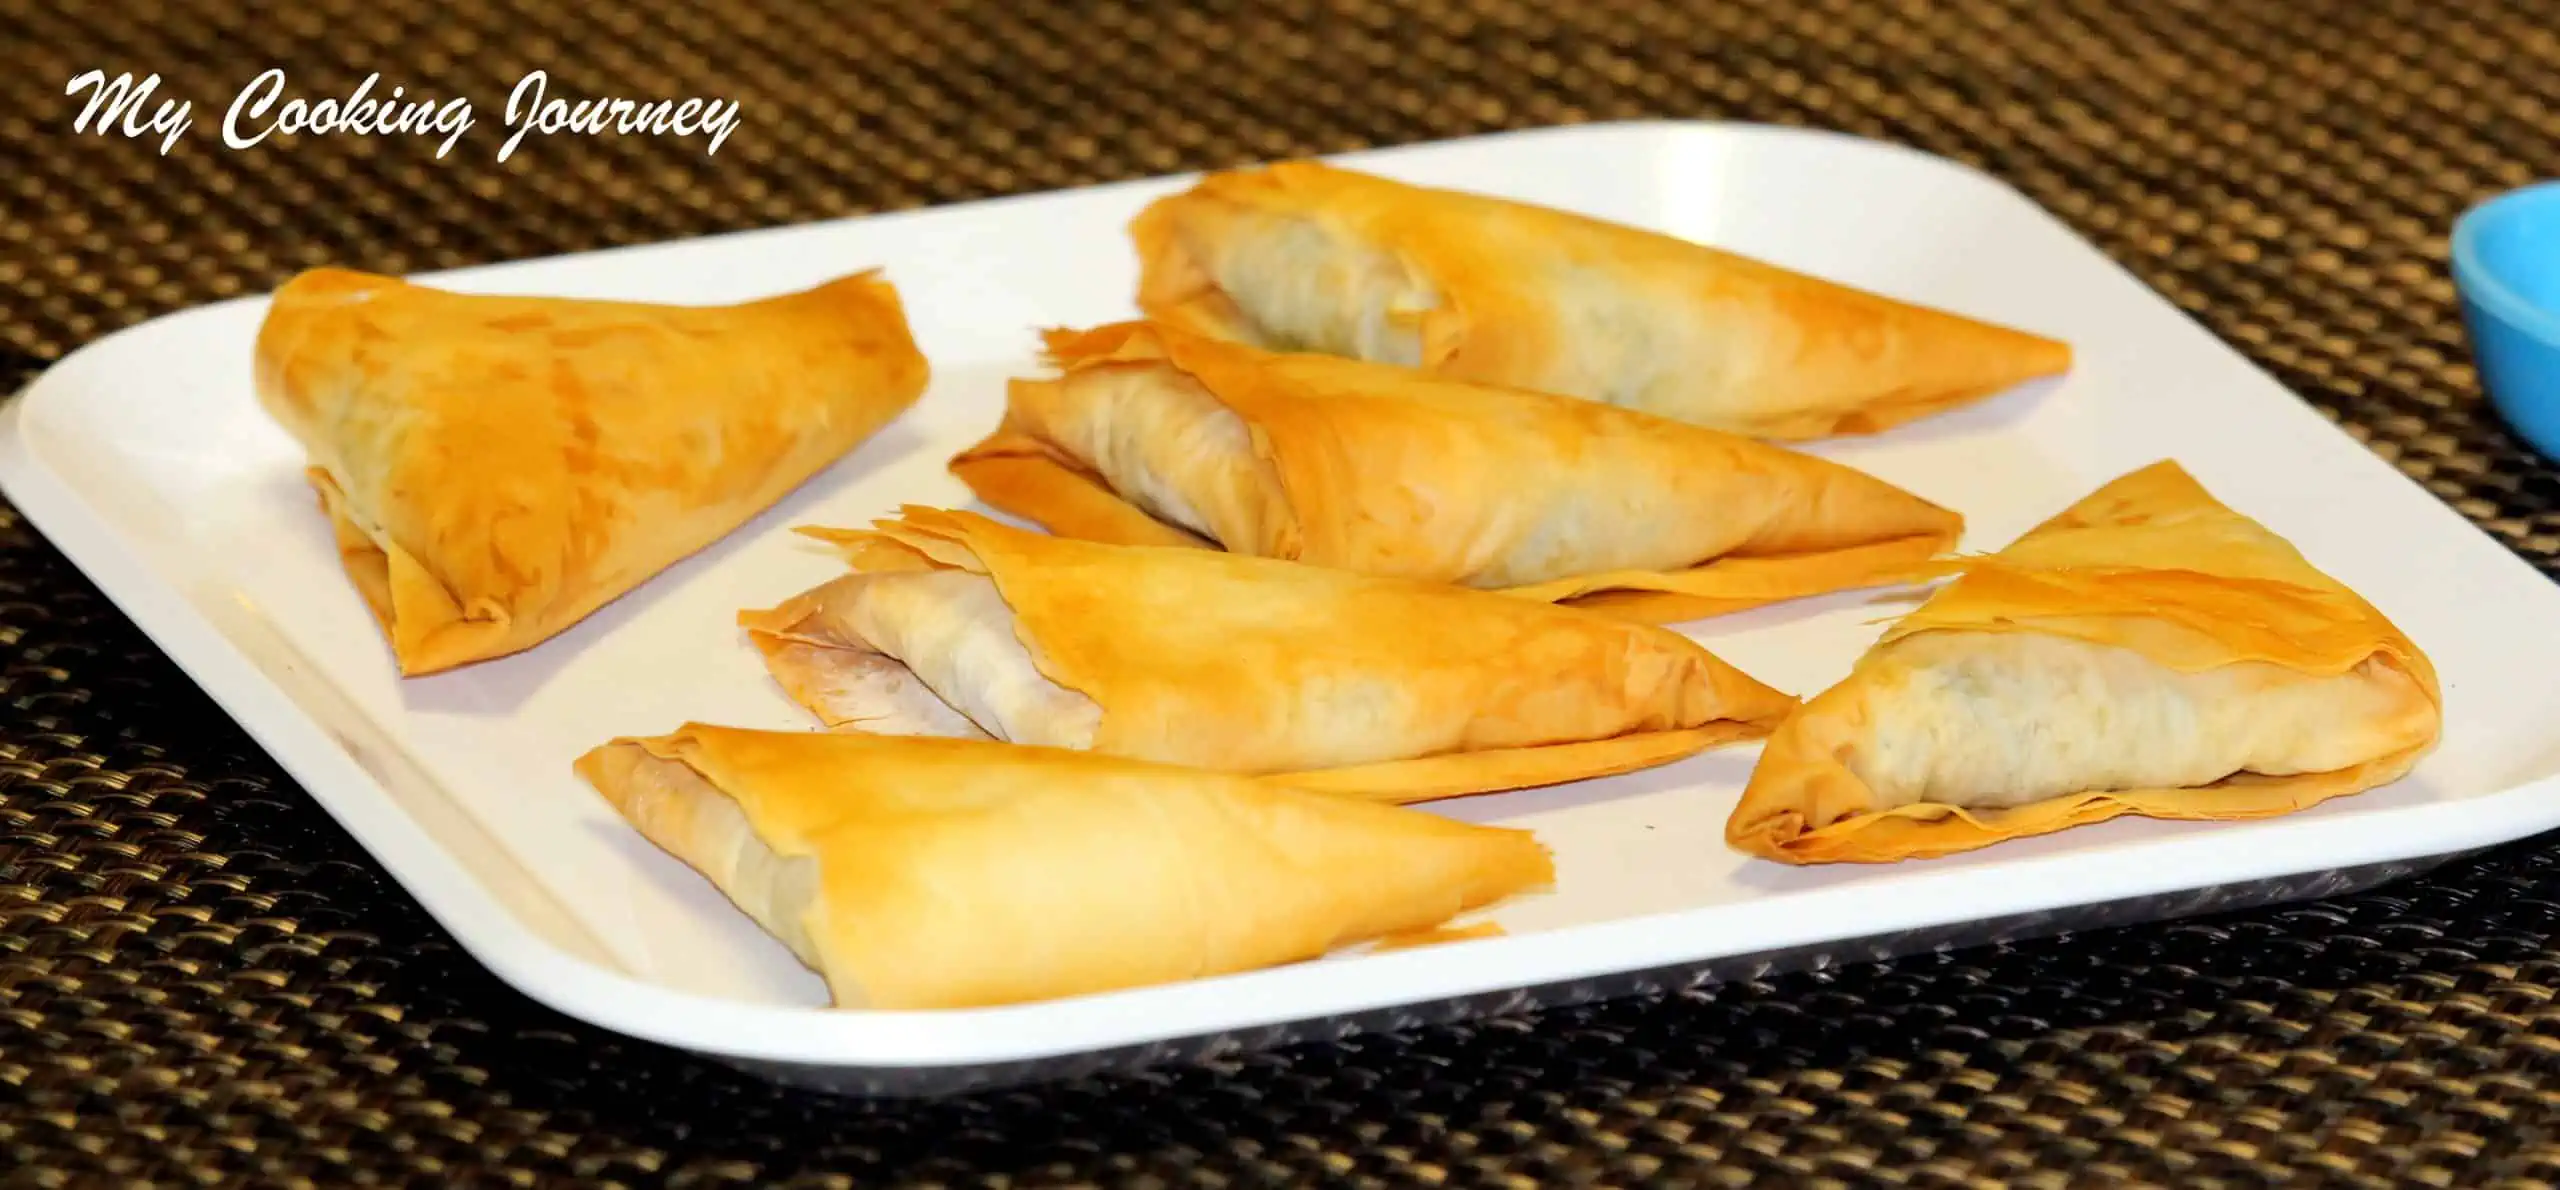 Baked Spinach and Paneer Samosa - Side view